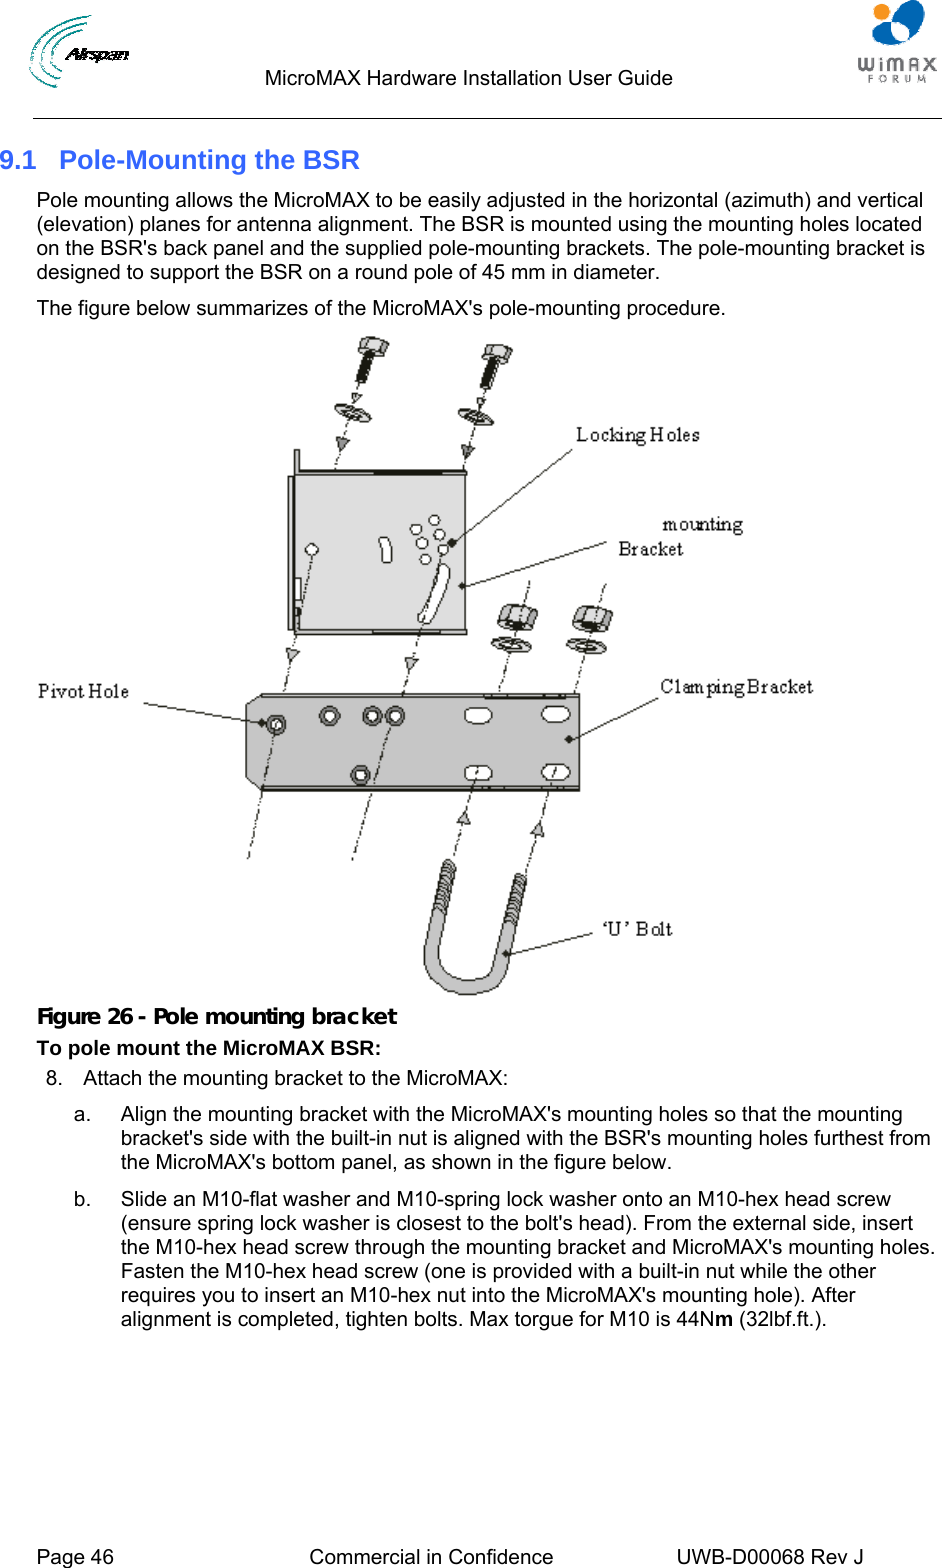                                  MicroMAX Hardware Installation User Guide     Page 46  Commercial in Confidence  UWB-D00068 Rev J   9.1  Pole-Mounting the BSR Pole mounting allows the MicroMAX to be easily adjusted in the horizontal (azimuth) and vertical (elevation) planes for antenna alignment. The BSR is mounted using the mounting holes located on the BSR&apos;s back panel and the supplied pole-mounting brackets. The pole-mounting bracket is designed to support the BSR on a round pole of 45 mm in diameter. The figure below summarizes of the MicroMAX&apos;s pole-mounting procedure.  Figure 26 - Pole mounting bracket To pole mount the MicroMAX BSR: 8.  Attach the mounting bracket to the MicroMAX: a.  Align the mounting bracket with the MicroMAX&apos;s mounting holes so that the mounting bracket&apos;s side with the built-in nut is aligned with the BSR&apos;s mounting holes furthest from the MicroMAX&apos;s bottom panel, as shown in the figure below. b.  Slide an M10-flat washer and M10-spring lock washer onto an M10-hex head screw (ensure spring lock washer is closest to the bolt&apos;s head). From the external side, insert the M10-hex head screw through the mounting bracket and MicroMAX&apos;s mounting holes. Fasten the M10-hex head screw (one is provided with a built-in nut while the other requires you to insert an M10-hex nut into the MicroMAX&apos;s mounting hole). After alignment is completed, tighten bolts. Max torgue for M10 is 44Nm (32lbf.ft.). 